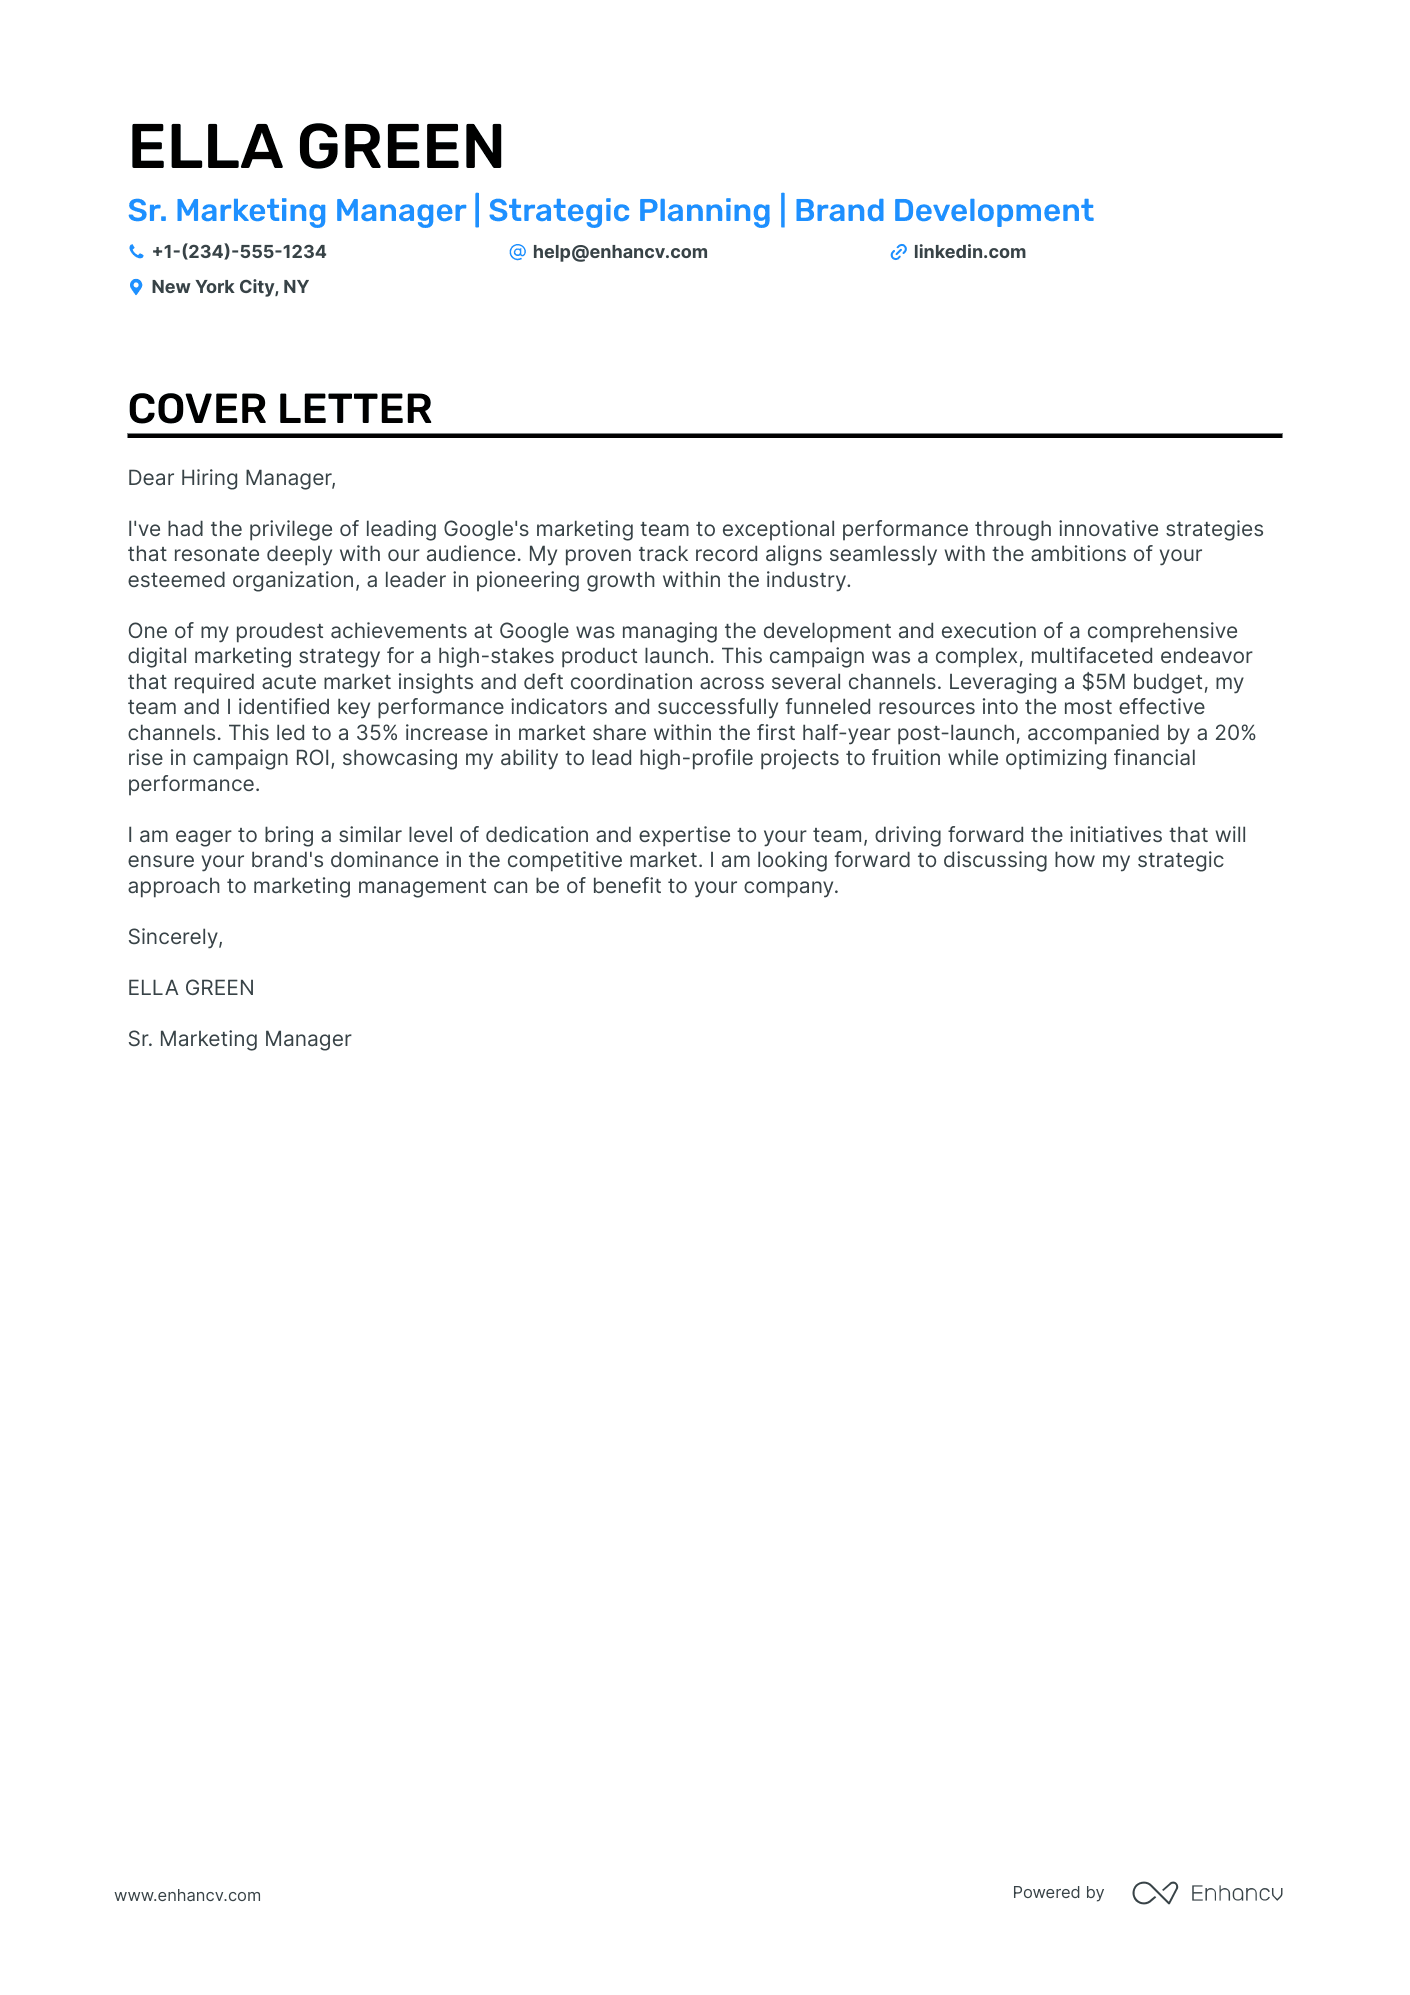 Marketing Manager cover letter